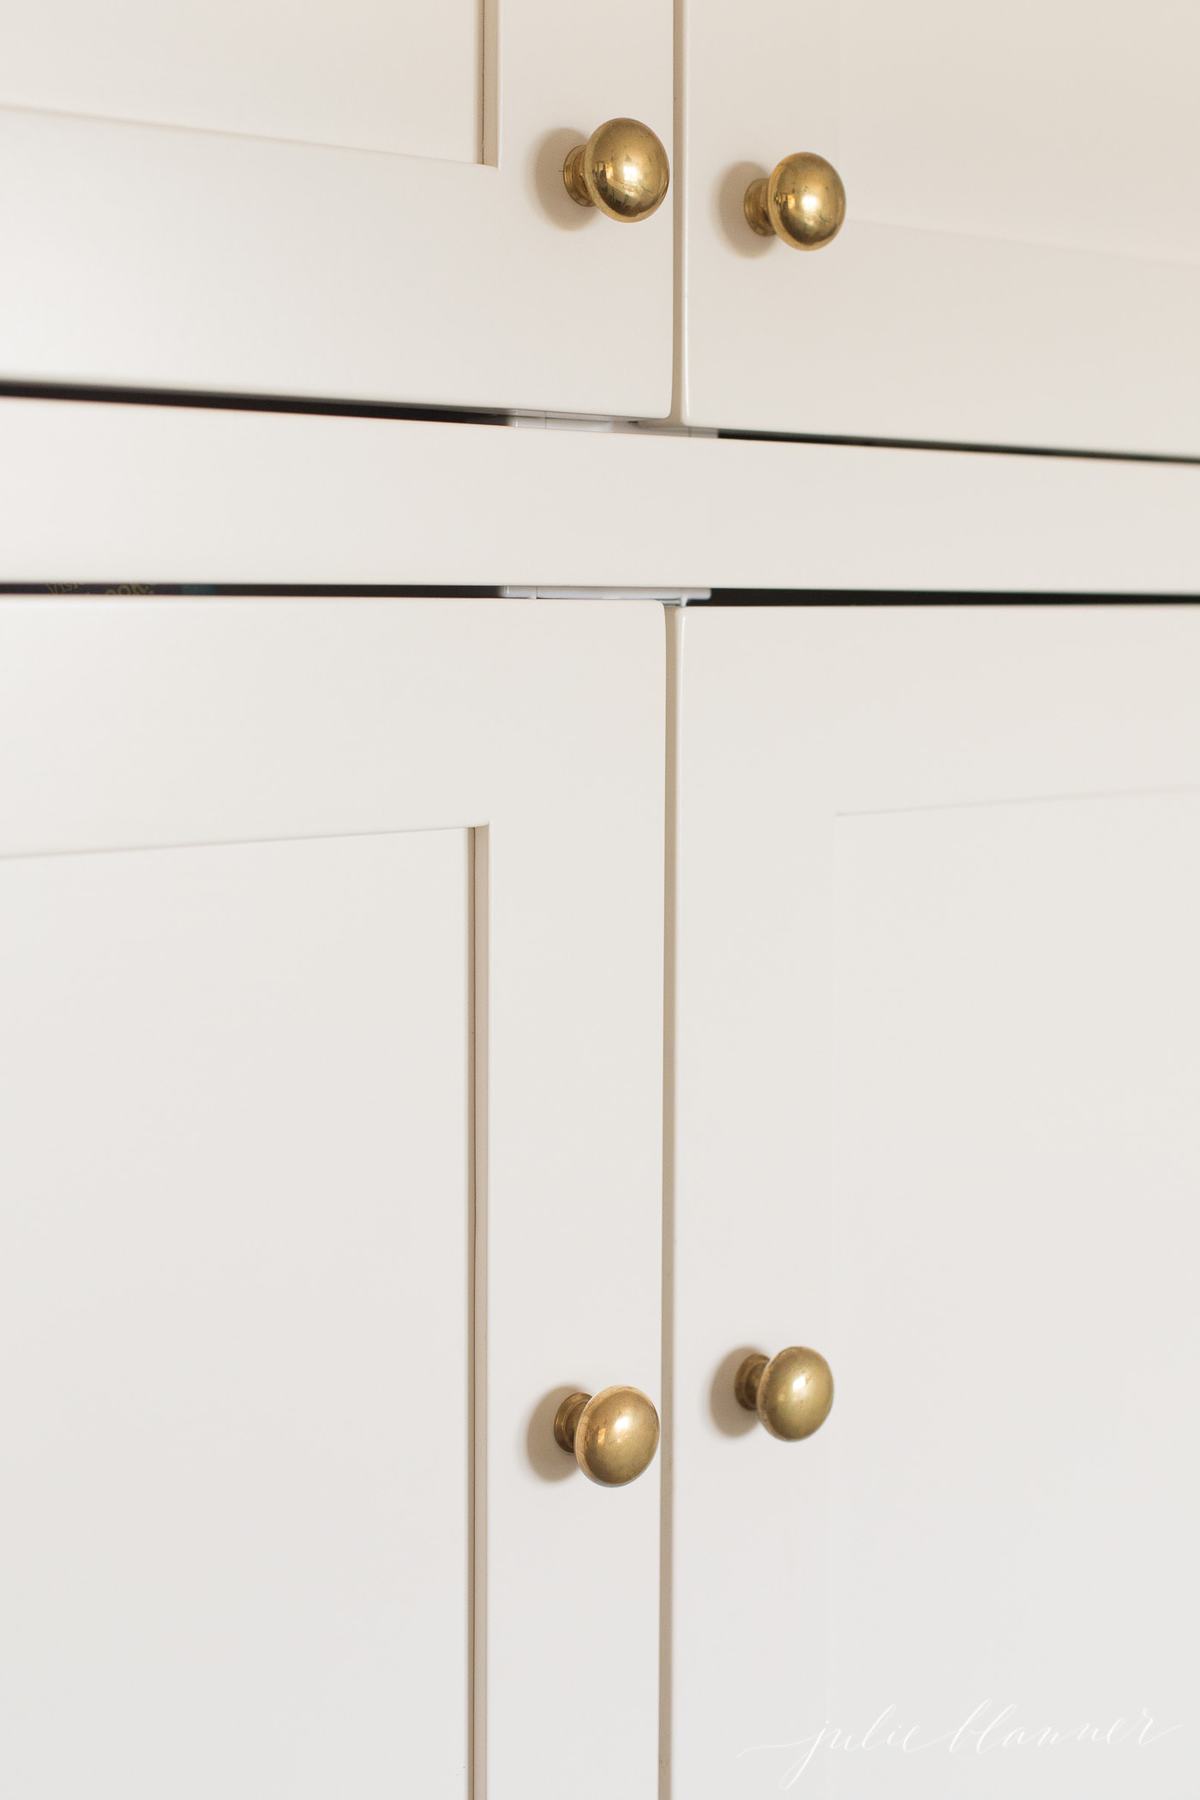 A close up of a white cabinet with brass knobs, showcasing exquisite cabinet door knob placement.